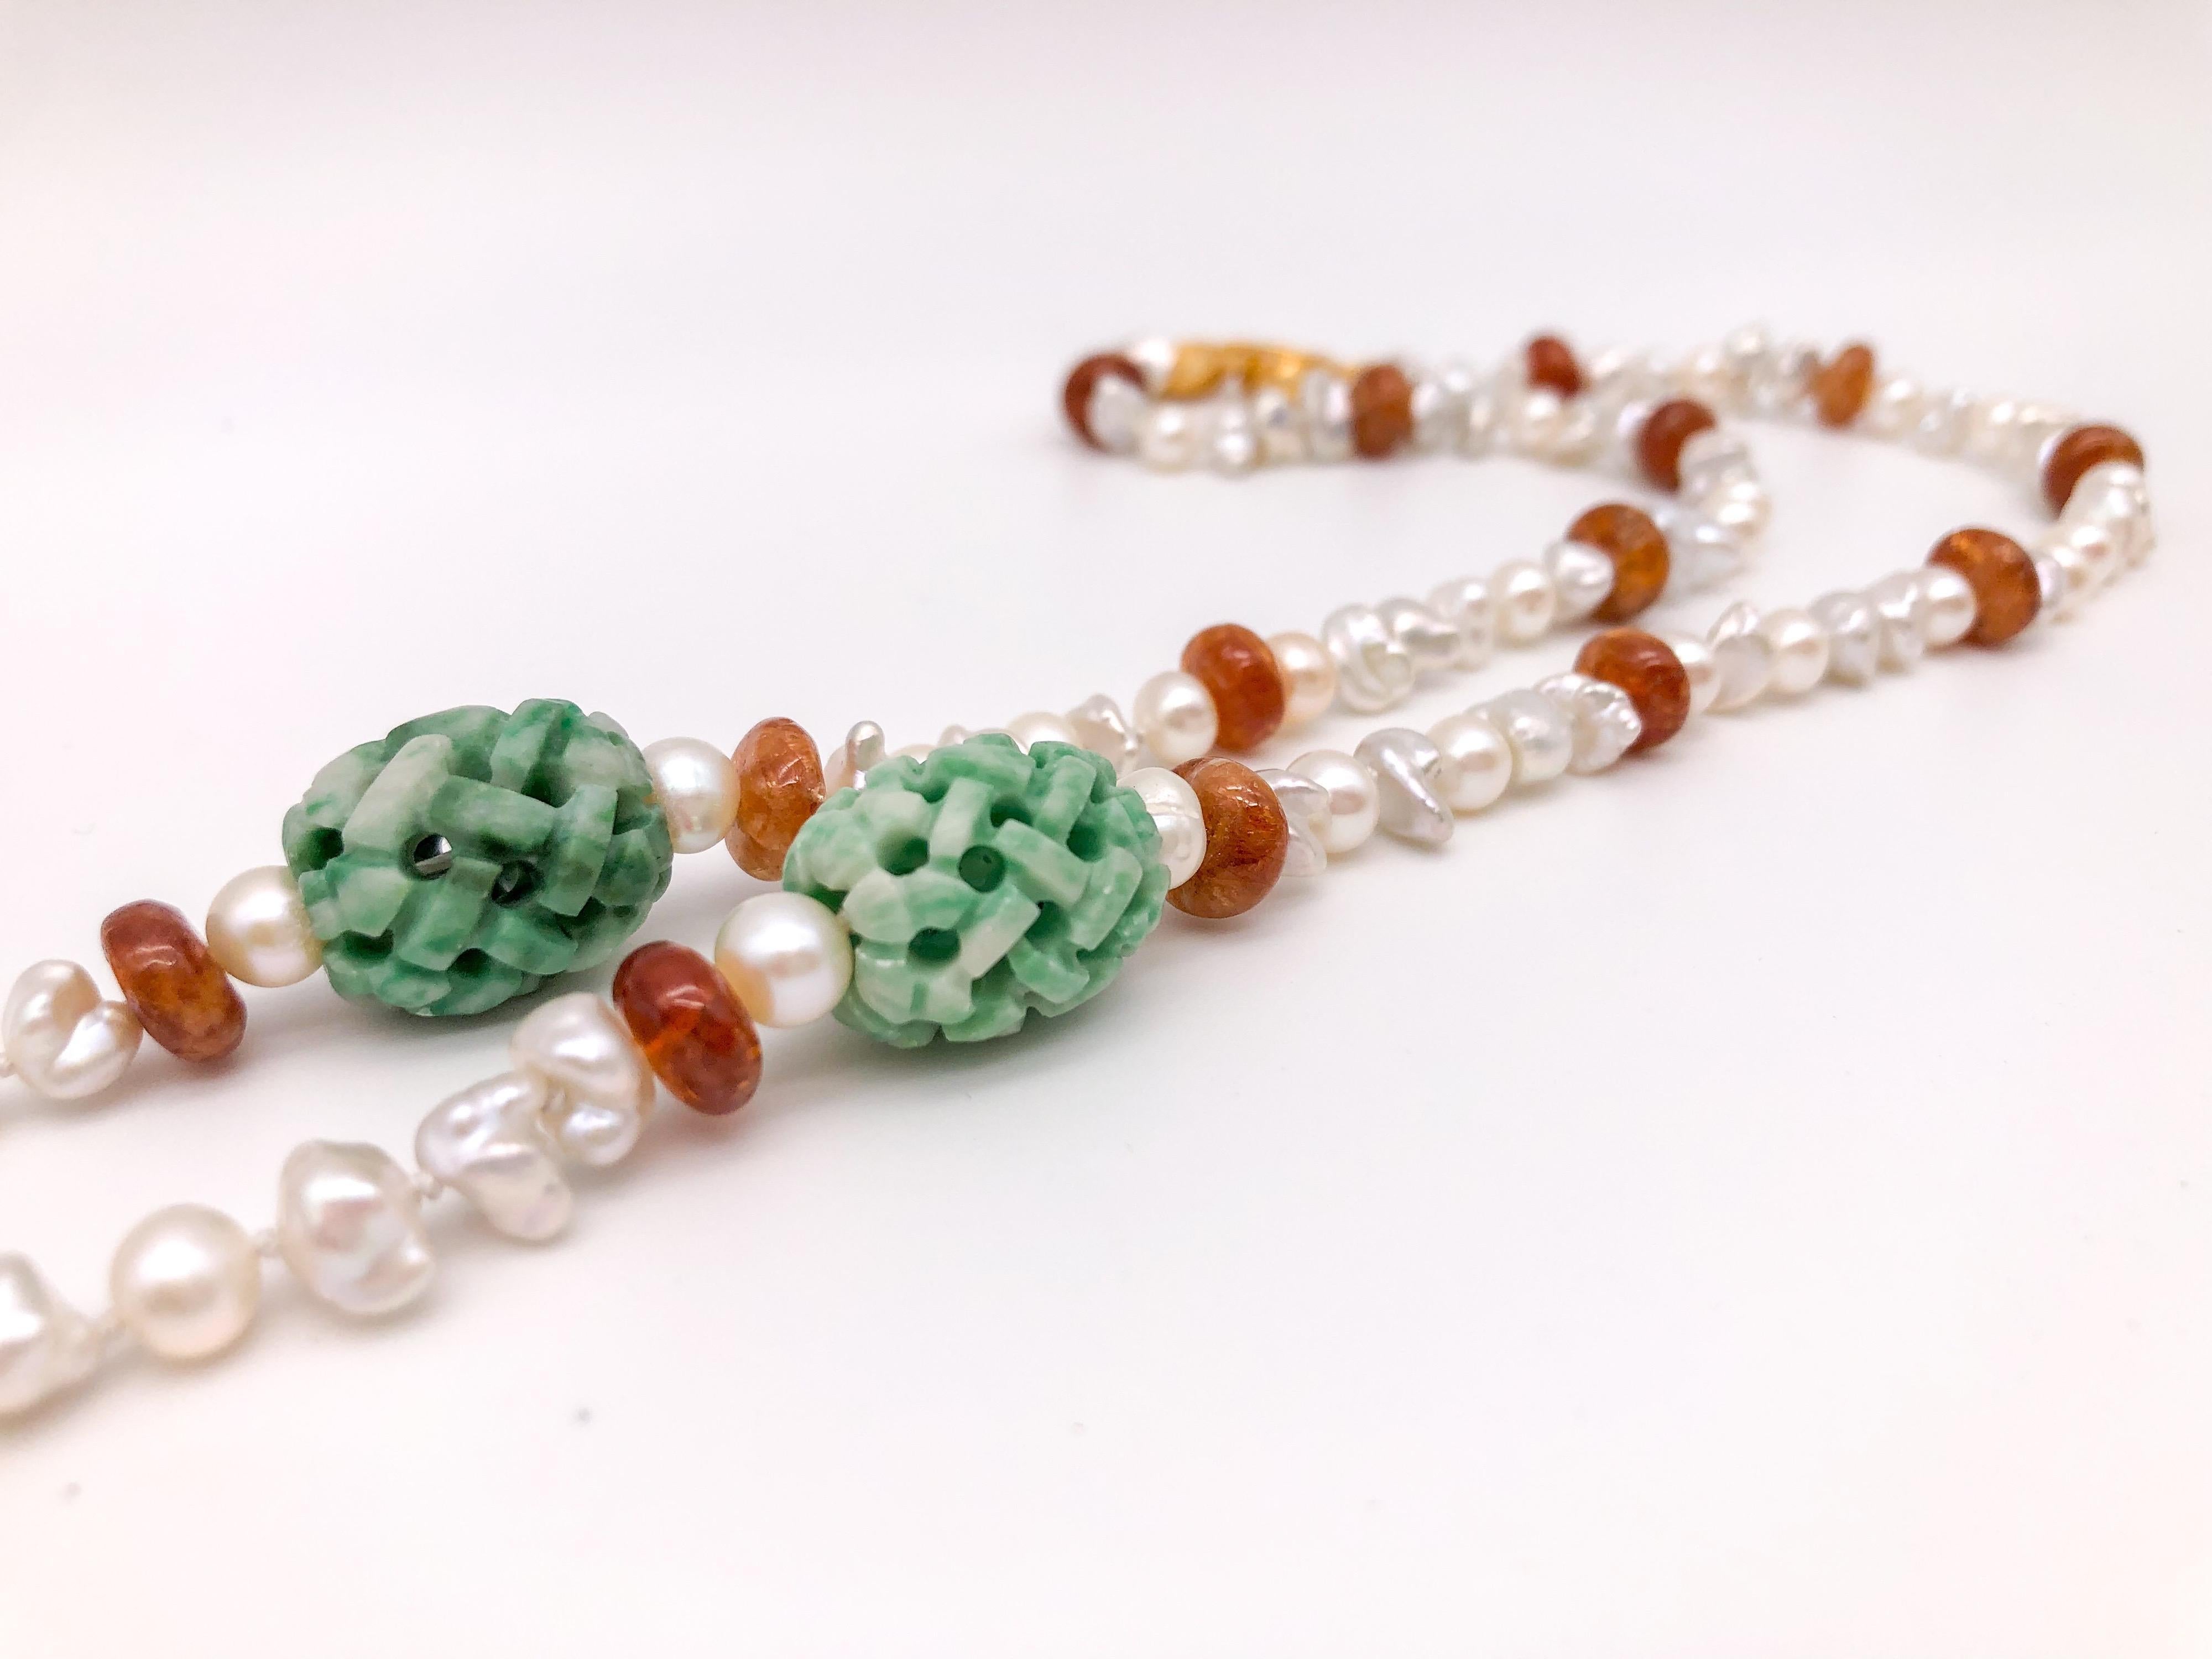 A.Jeschel Splendid Long Pearl, Hessonite, and Tobacco Jade Necklace 1